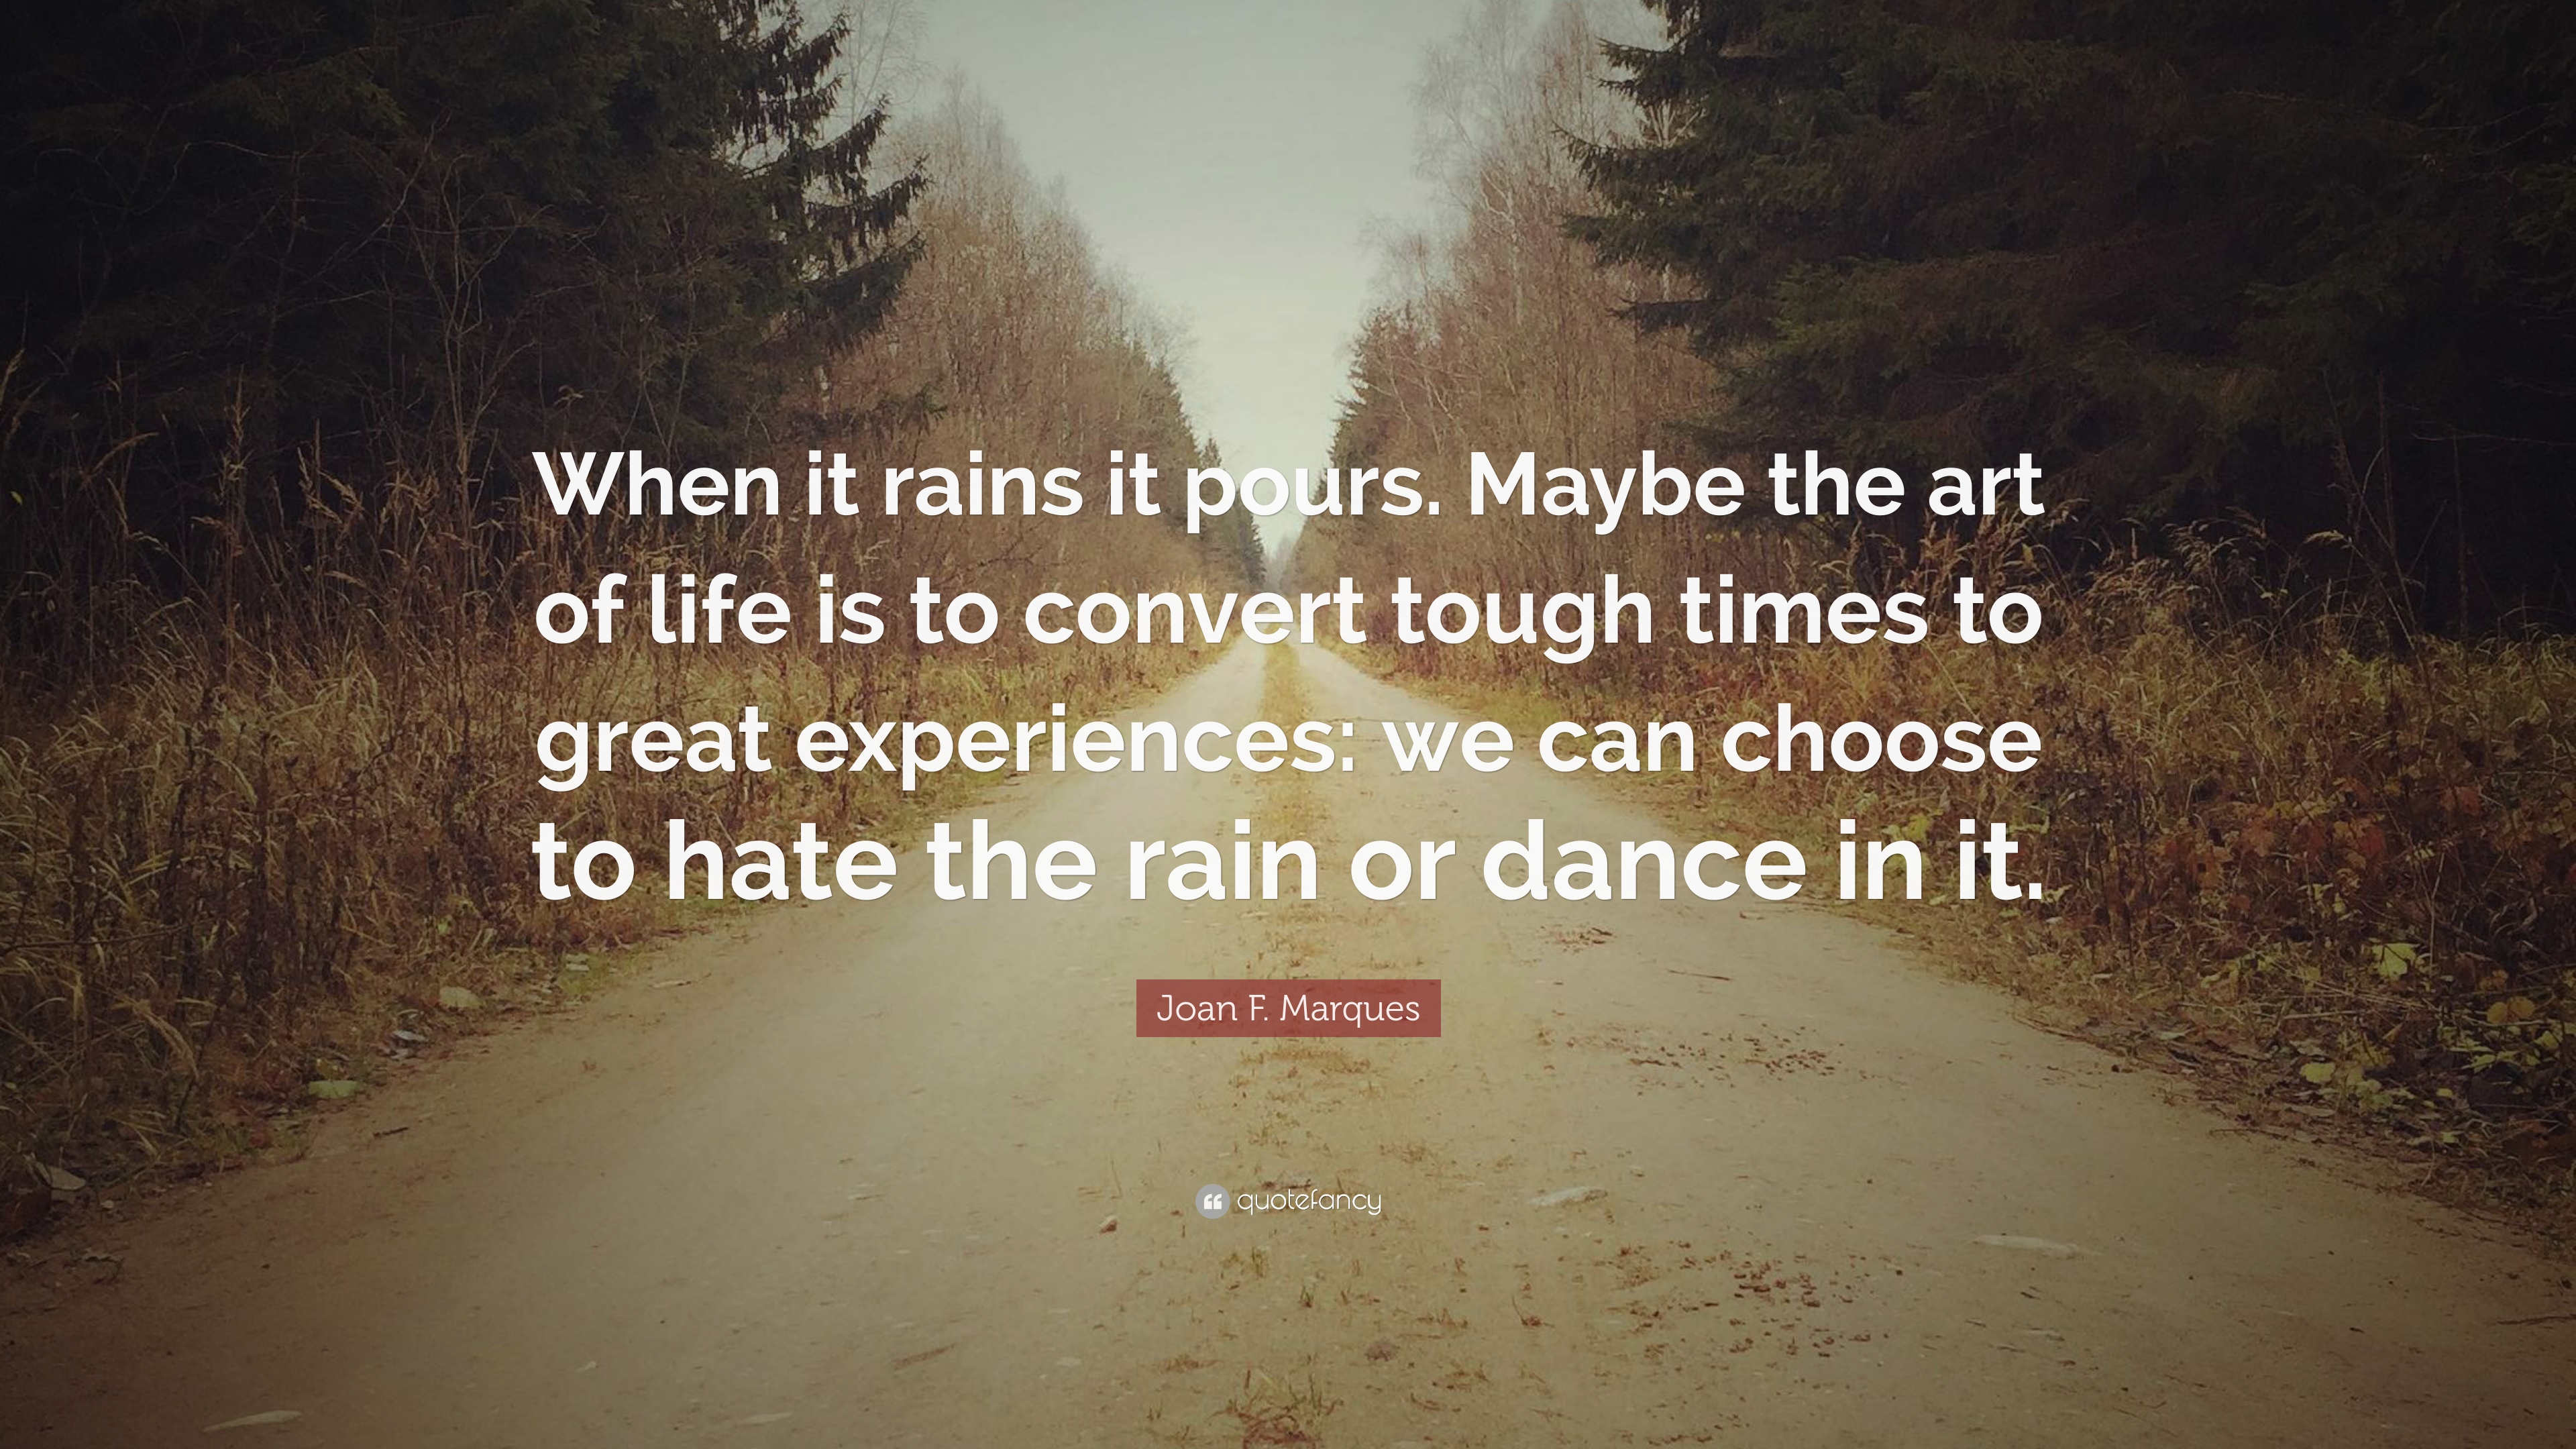 Joan F. Marques Quote: “When it rains it pours. Maybe the art of ...